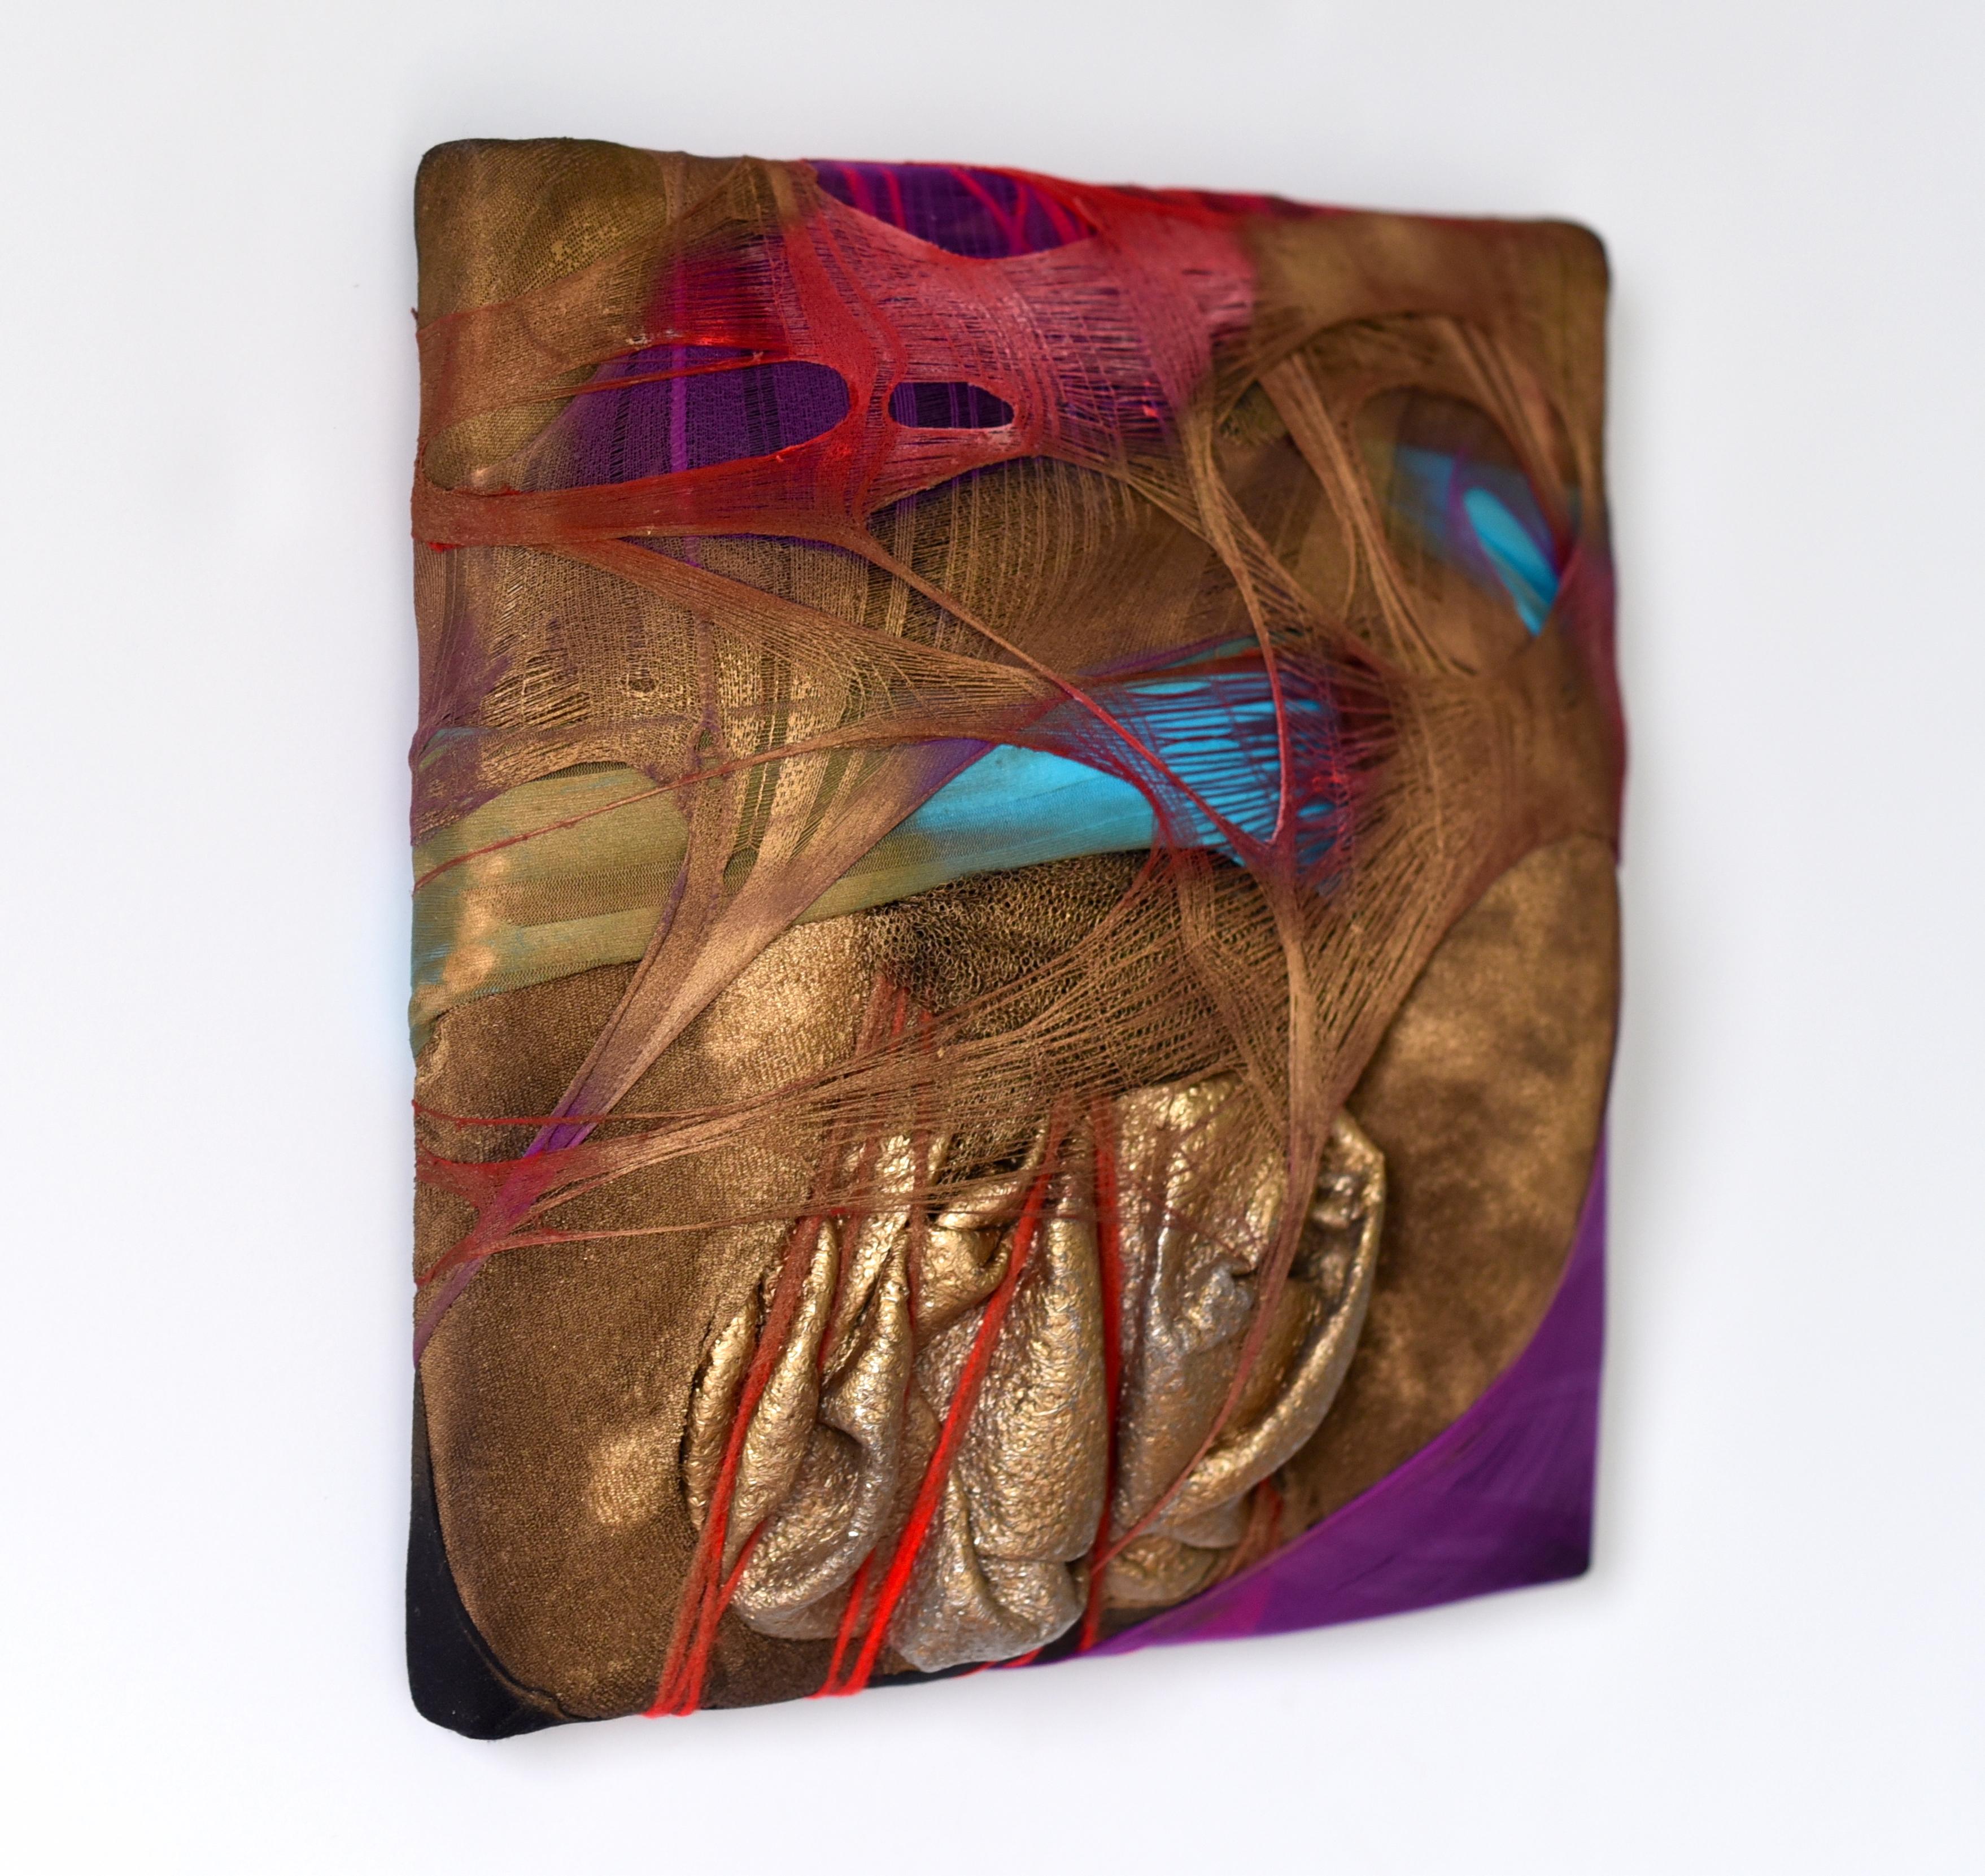 Wall Pillow 3 gold metallic fabric contemporary abstract painting textile art - Sculpture by Anna-Lena Sauer